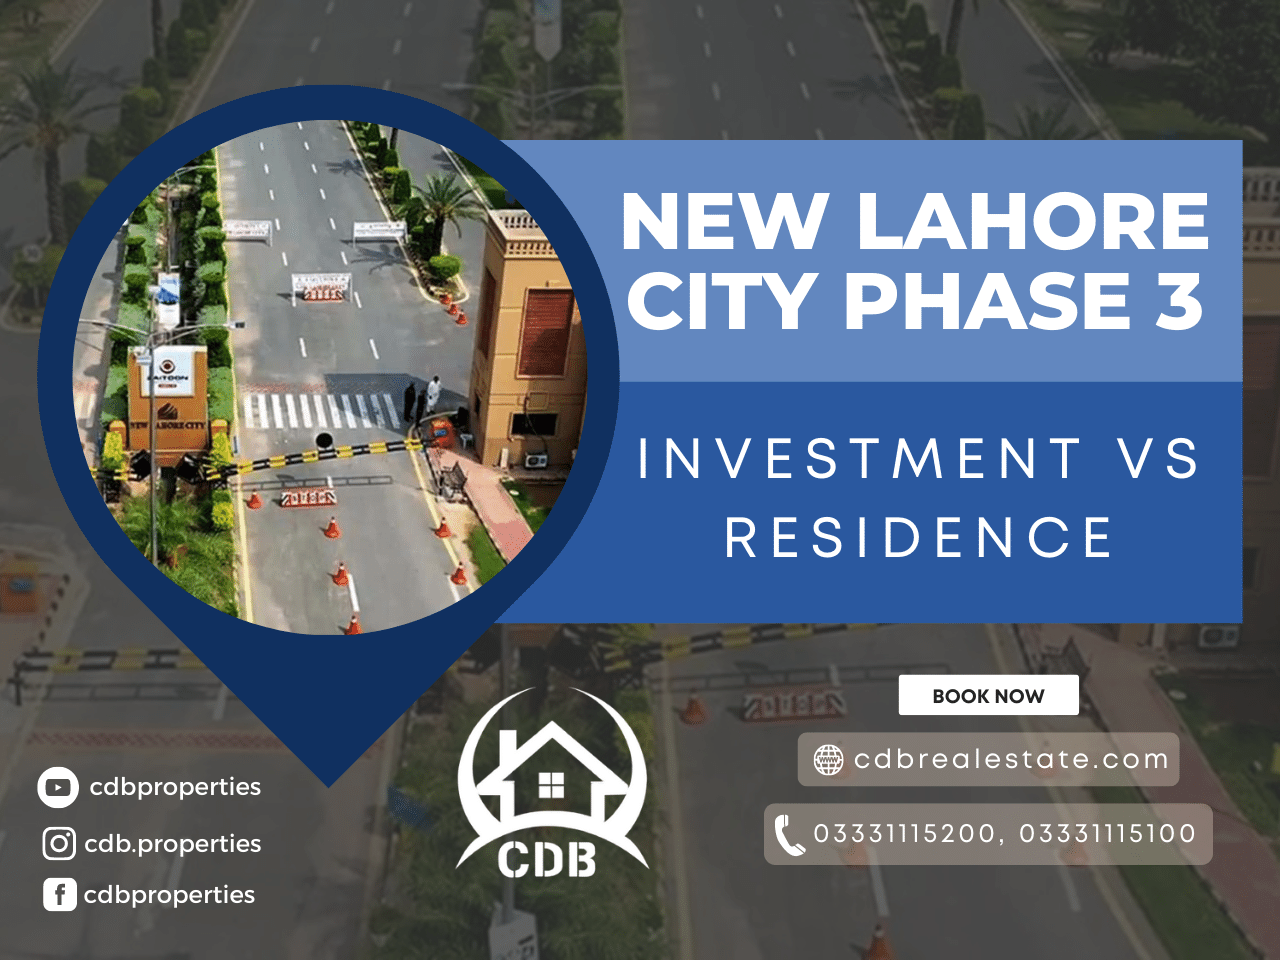 New Lahore City Phase 3 Investment VS Residence